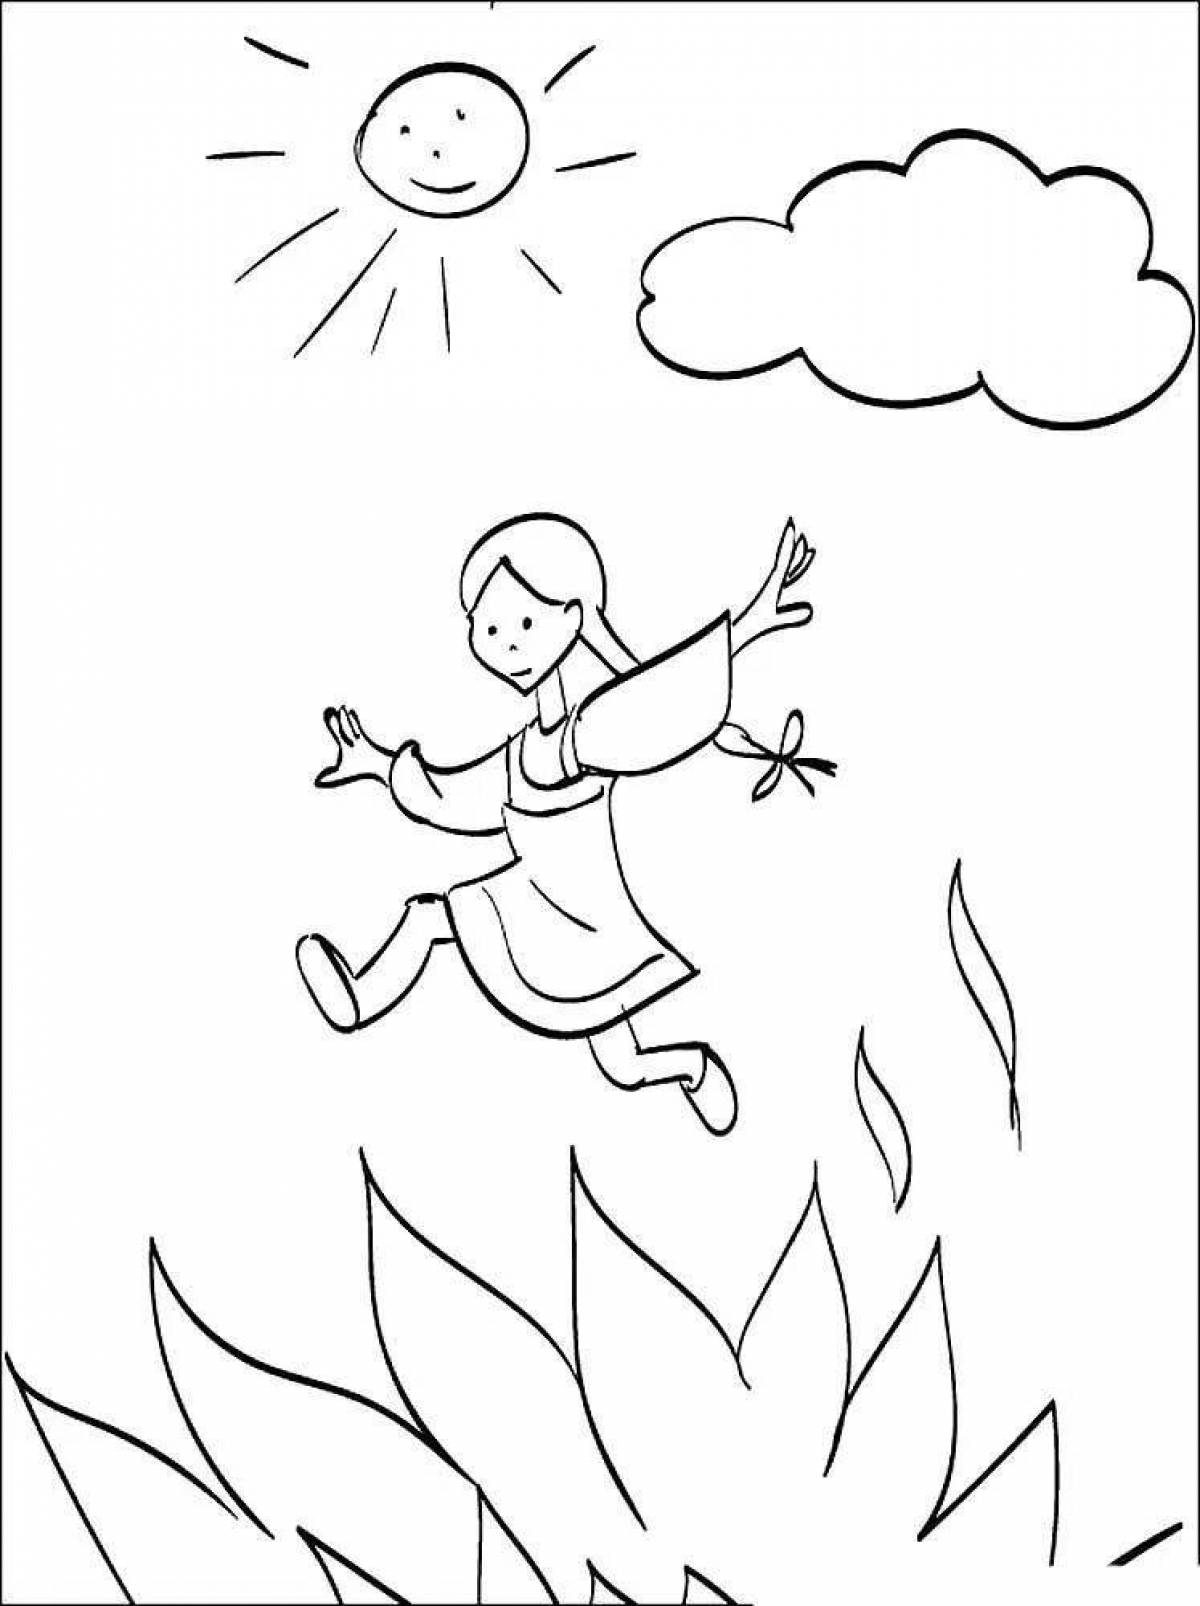 Jumping fire stylish coloring page